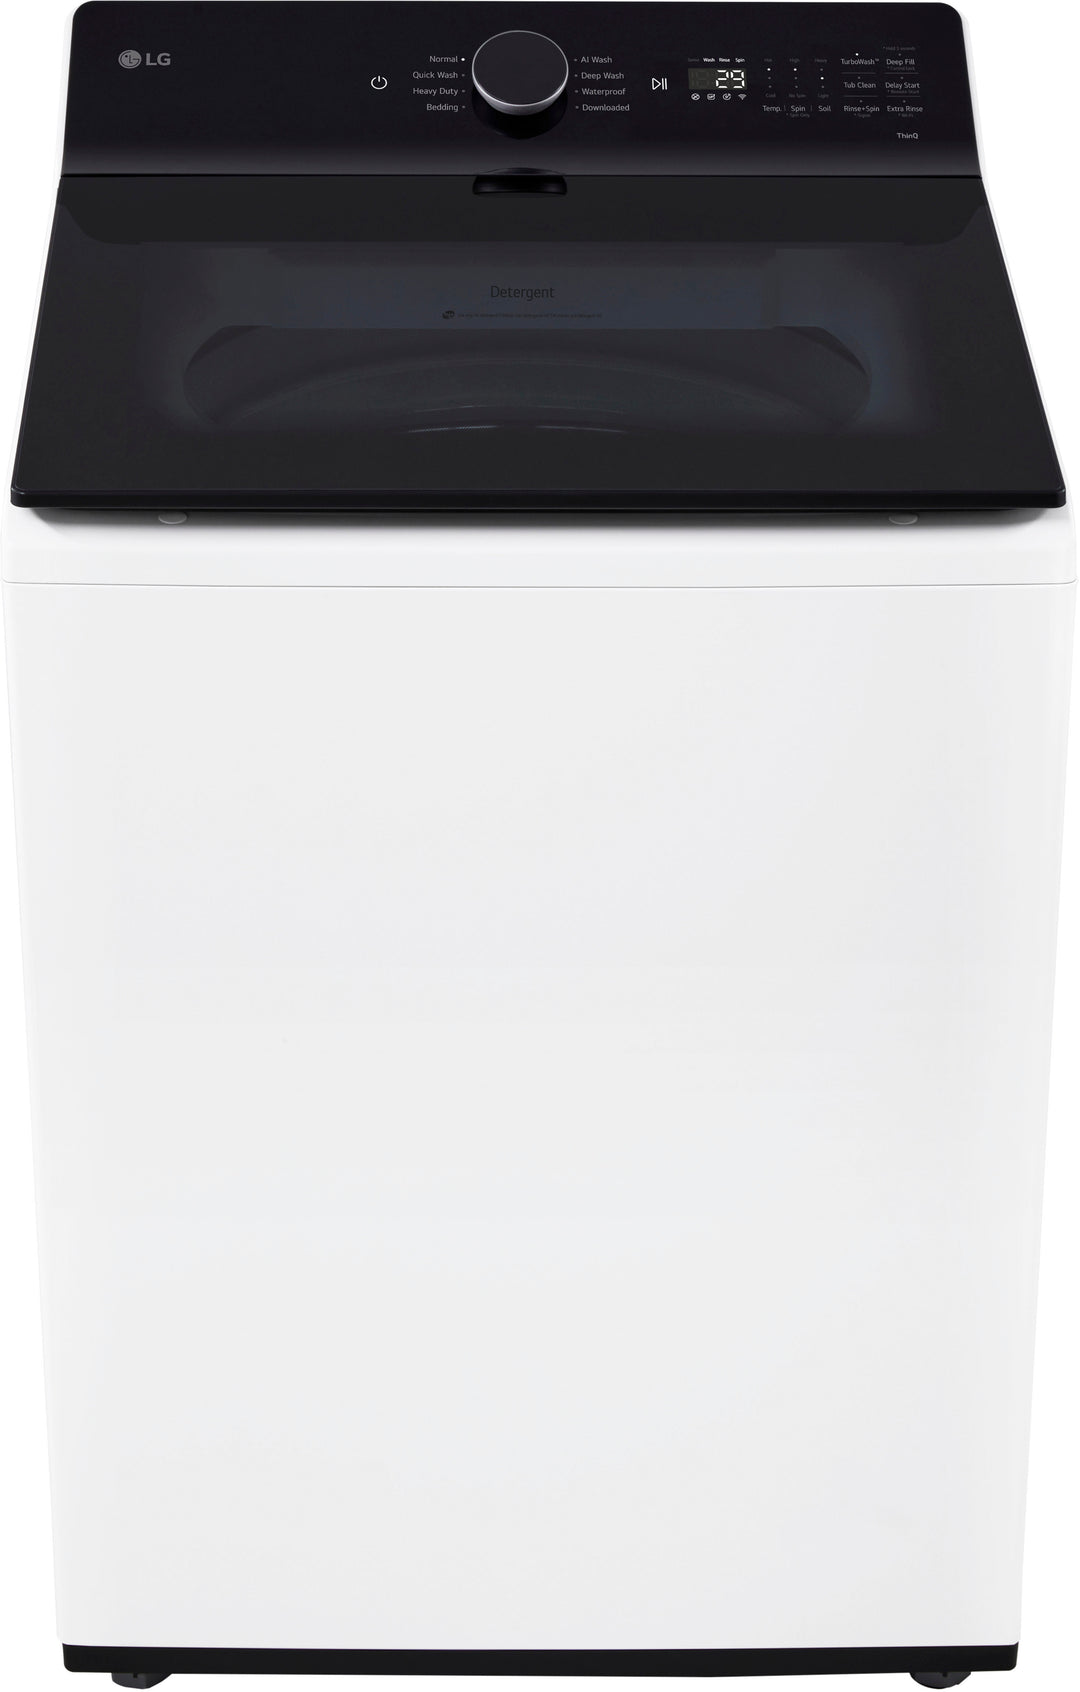 LG - 5.5 Cu. Ft. High Efficiency Smart Top Load Washer with EasyUnload - Alpine White_1